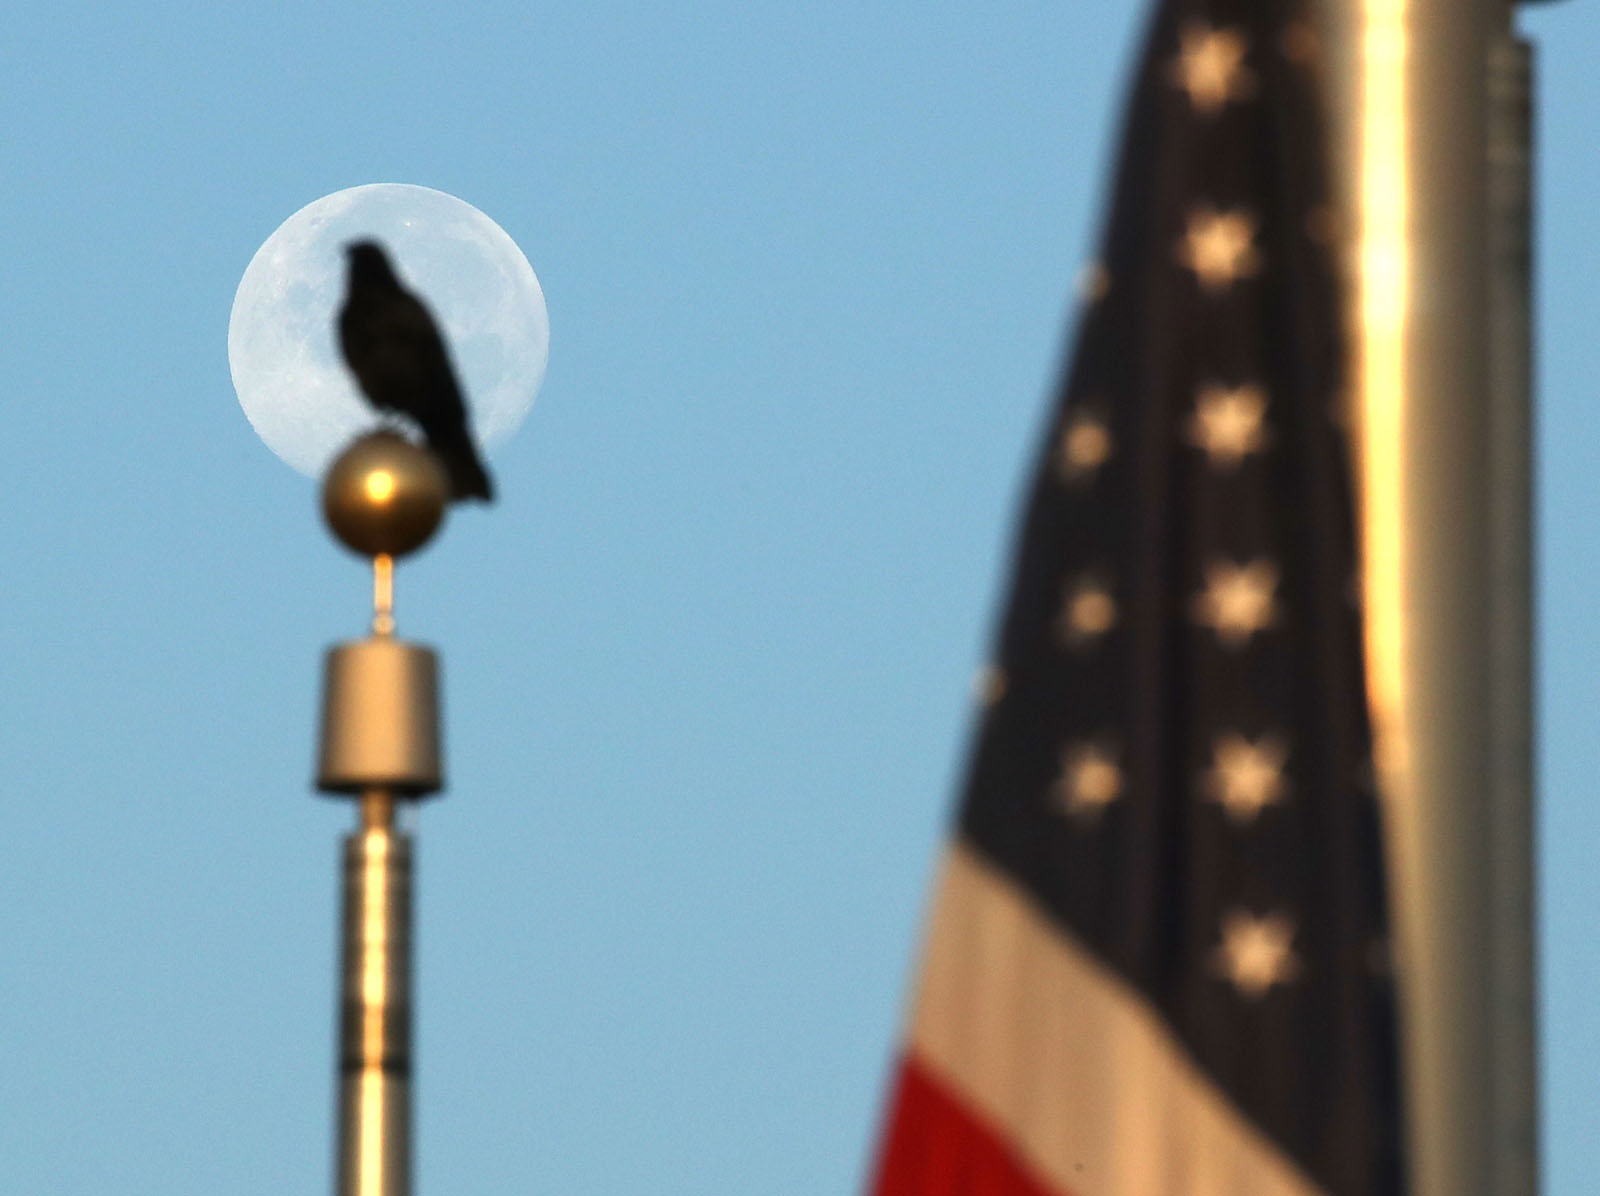 WASHINGTON, DC - JULY 21: A bird sits on a flag pole in front of a full moon through the grounds of the Washington Monument where the flags are at half staff, on July 21, 2016 in Washington, DC. Washington area temperatures are forecasted to reach the upper 90s for the next few days. (Photo by Mark Wilson/Getty Images)